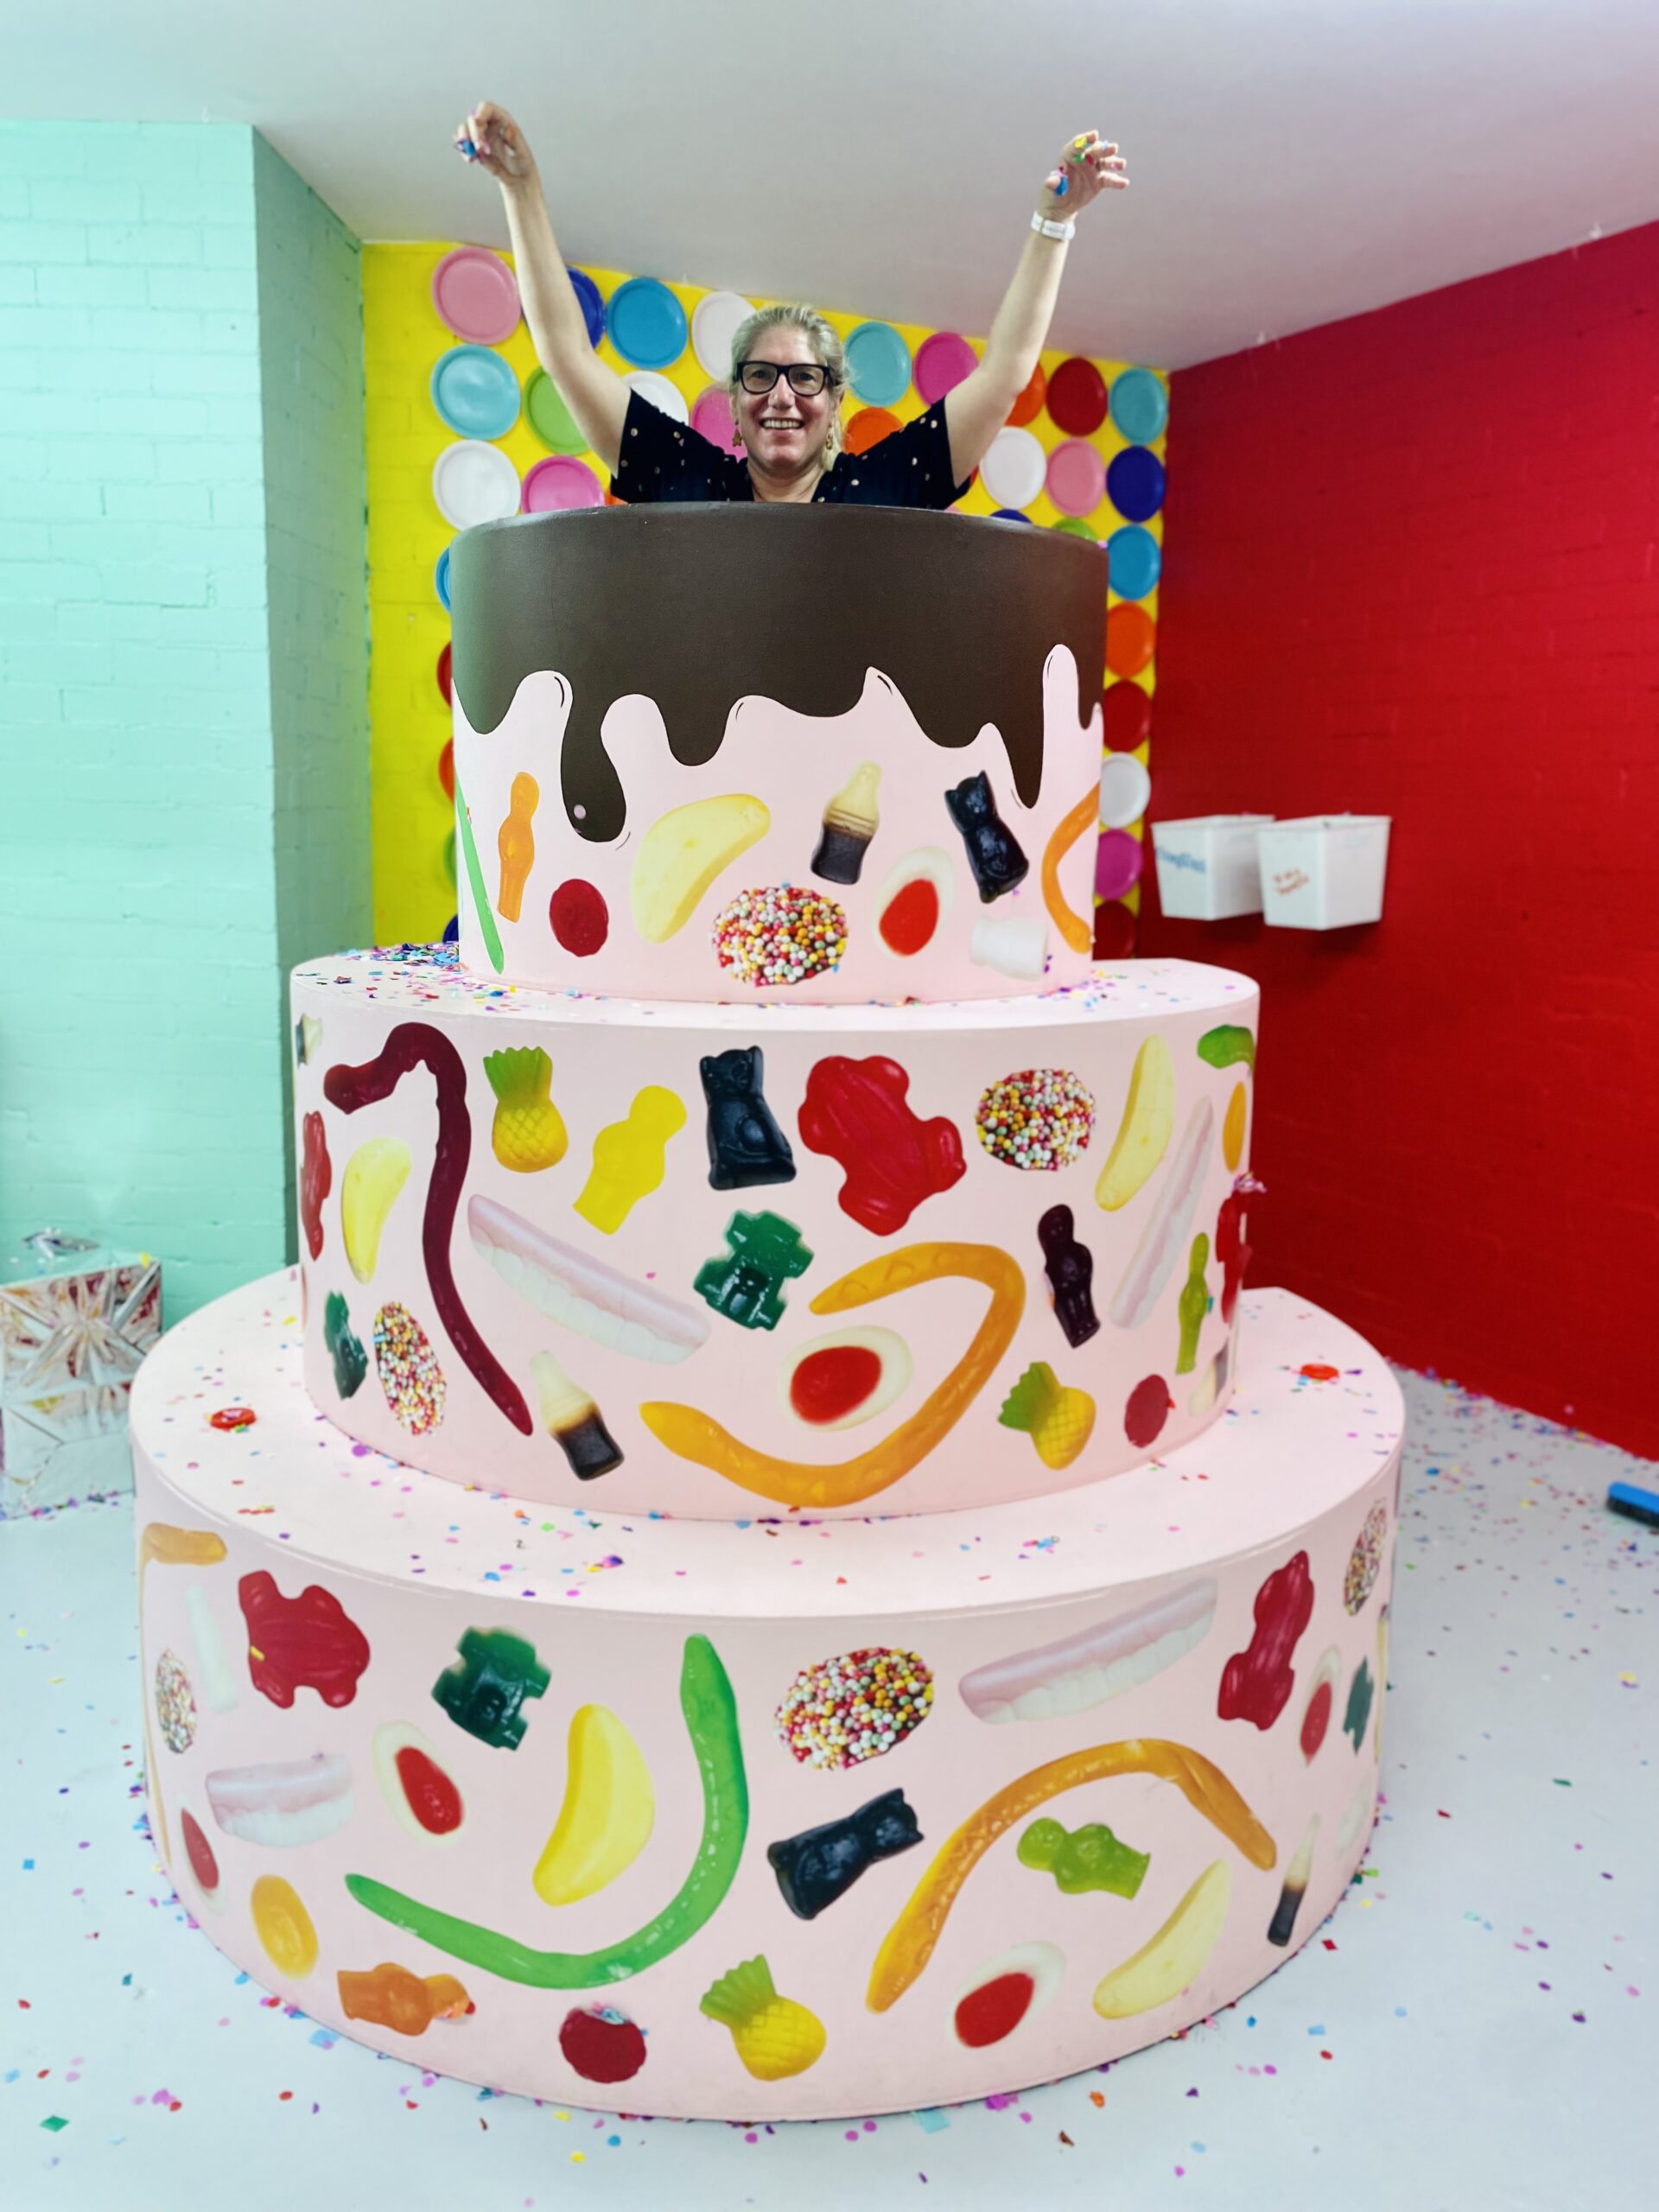 woman jumping out of model life size birthday cake throwing confetti